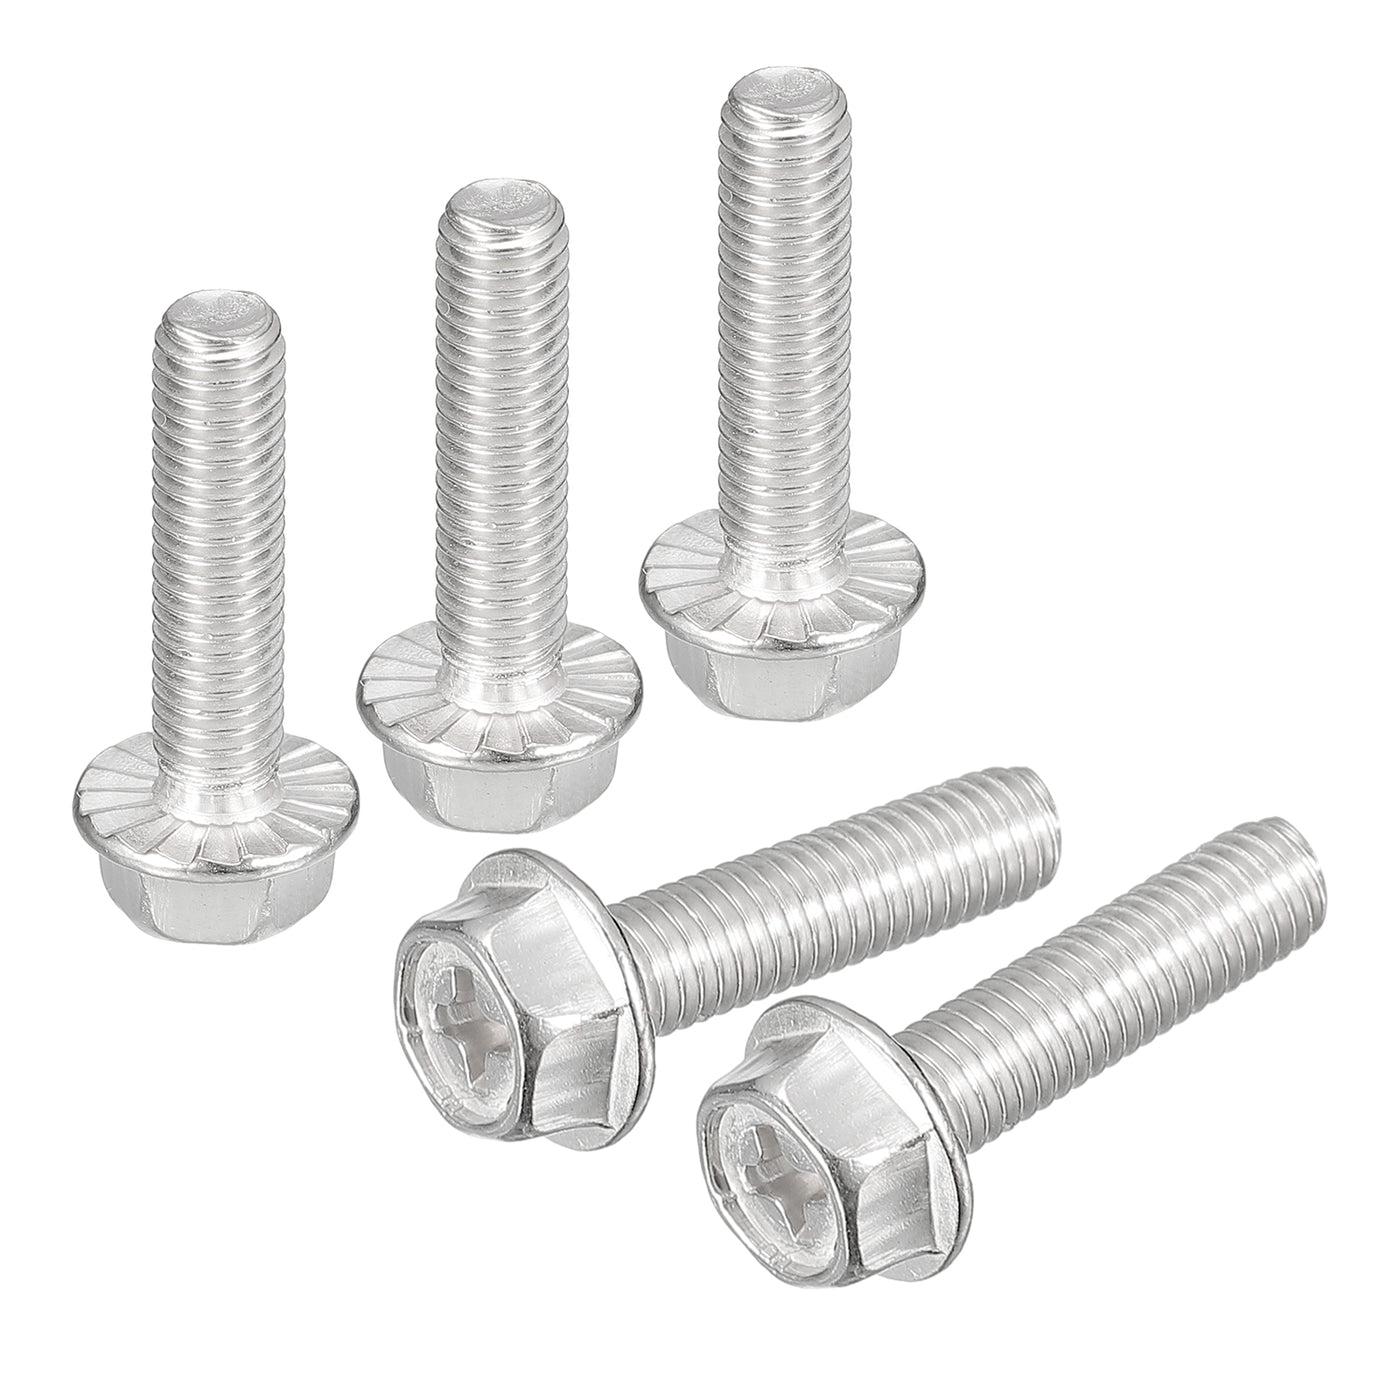 uxcell Uxcell M5x20mm Phillips Hex Head Flange Bolts, 10pcs 304 Stainless Steel Screws